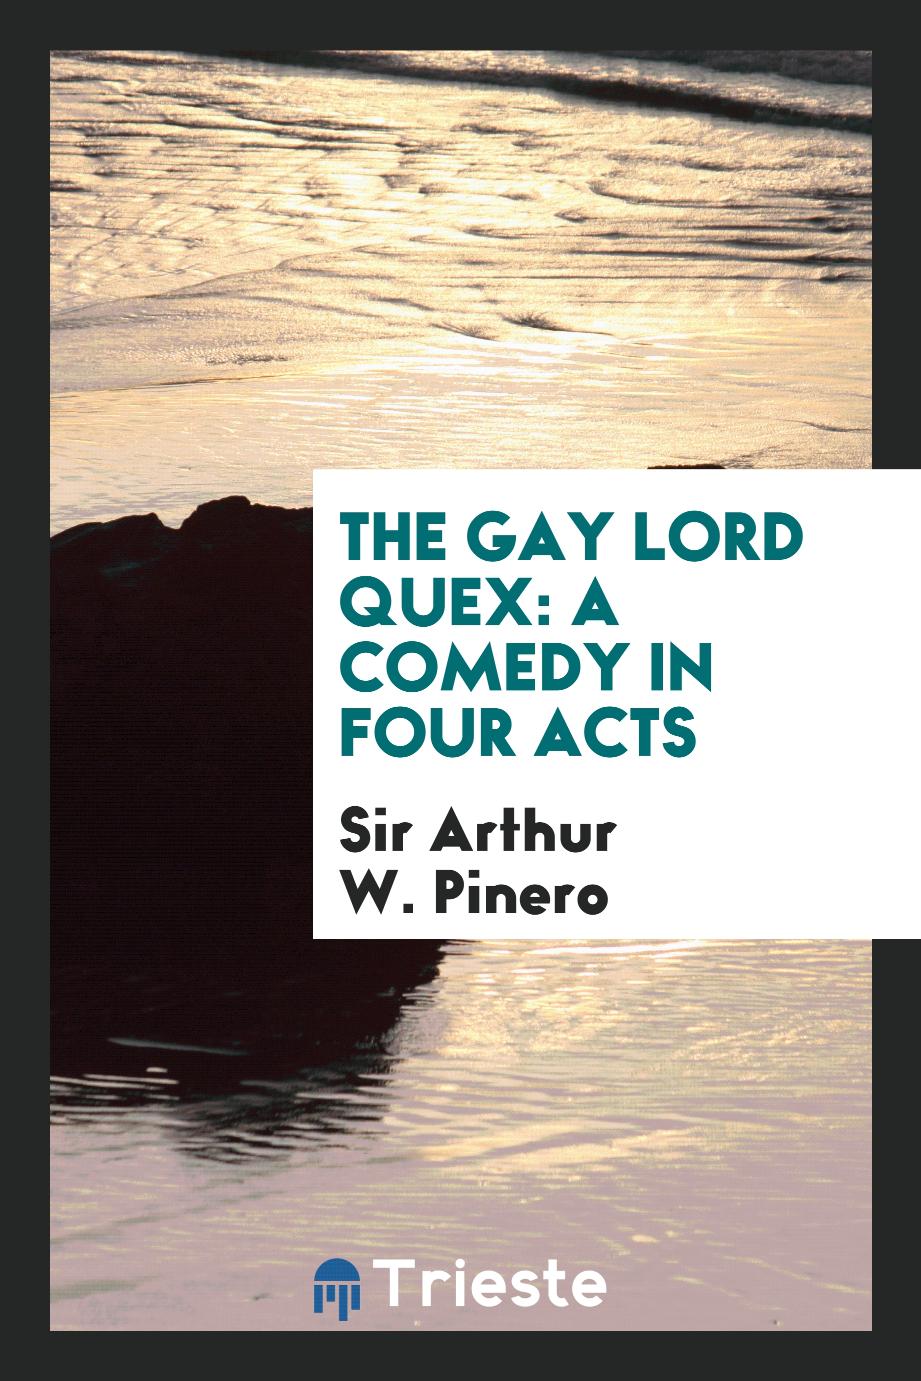 The gay Lord Quex: a comedy in four acts